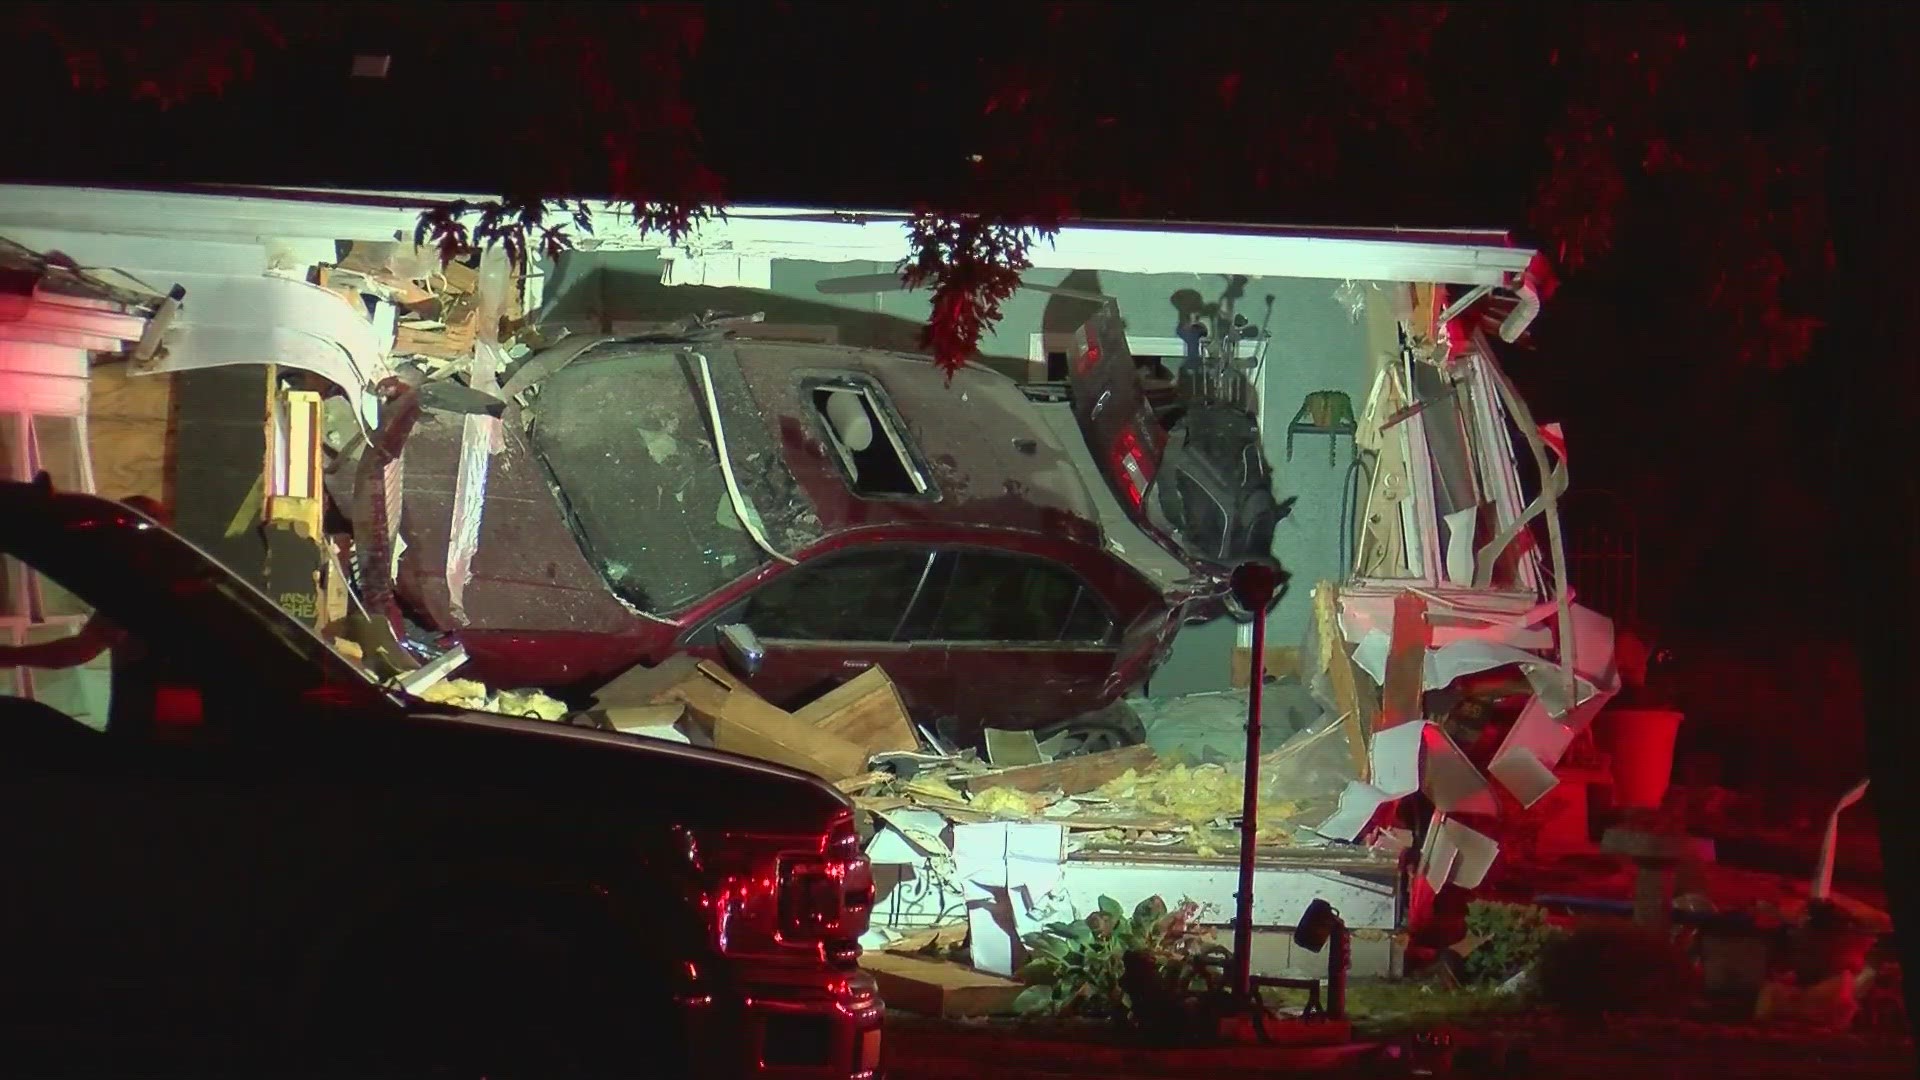 According to the Monroe County sheriff's office, the driver drove through a front yard and slammed into a bedroom of a home on Sterns Road in Temperance.